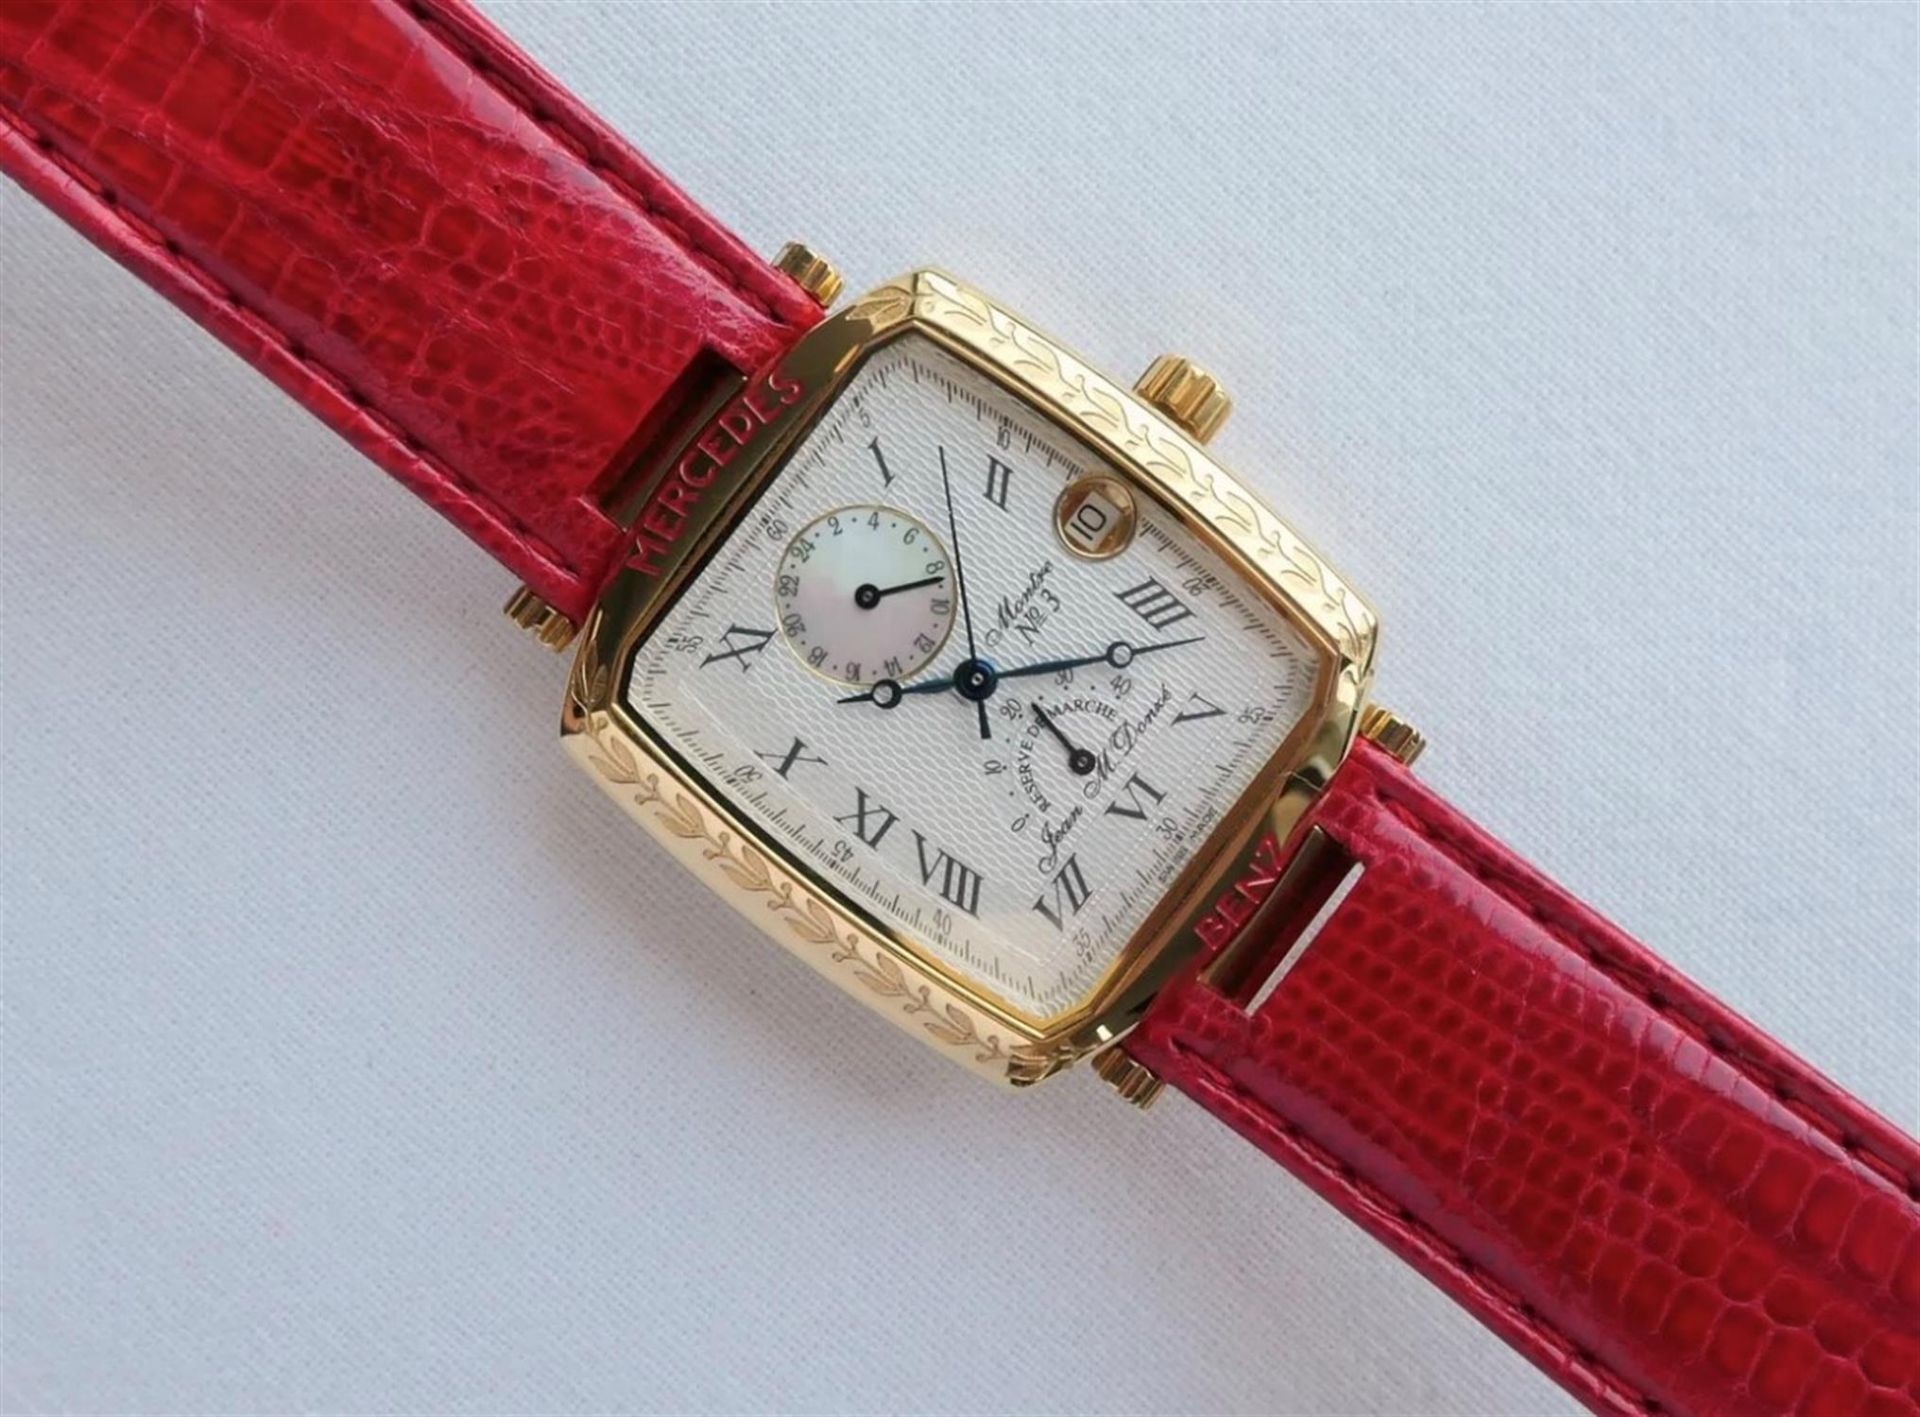 A 18ct Gold-Plated Mercedes-Benz Swiss-Made Automatic Wrist Watch - Image 4 of 10